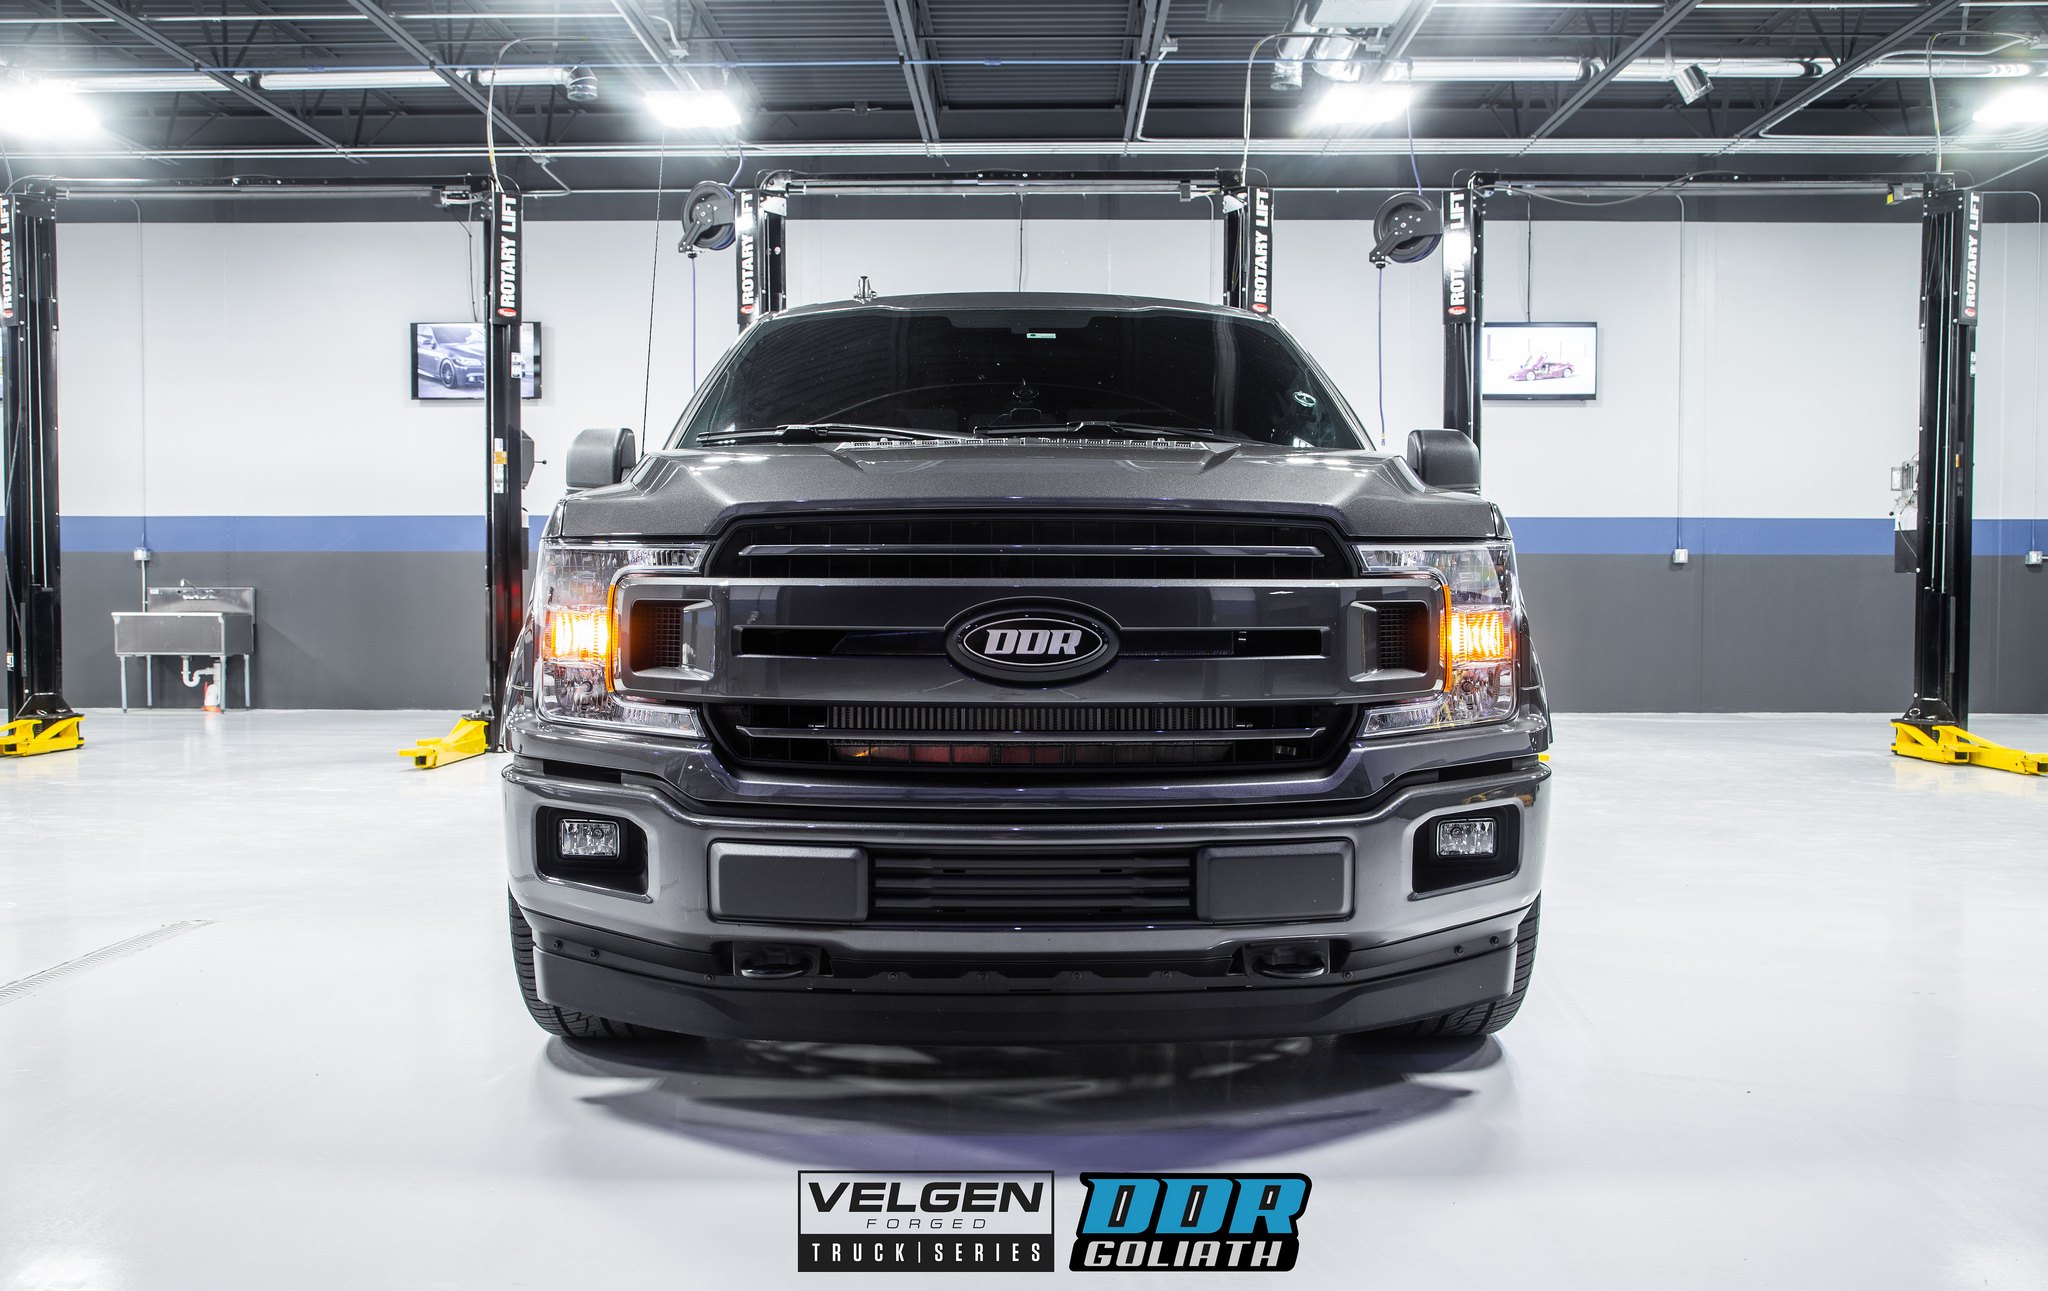 Front Bumper with LED Fog Lights on Gray Ford F-150 - Photo by Velgen